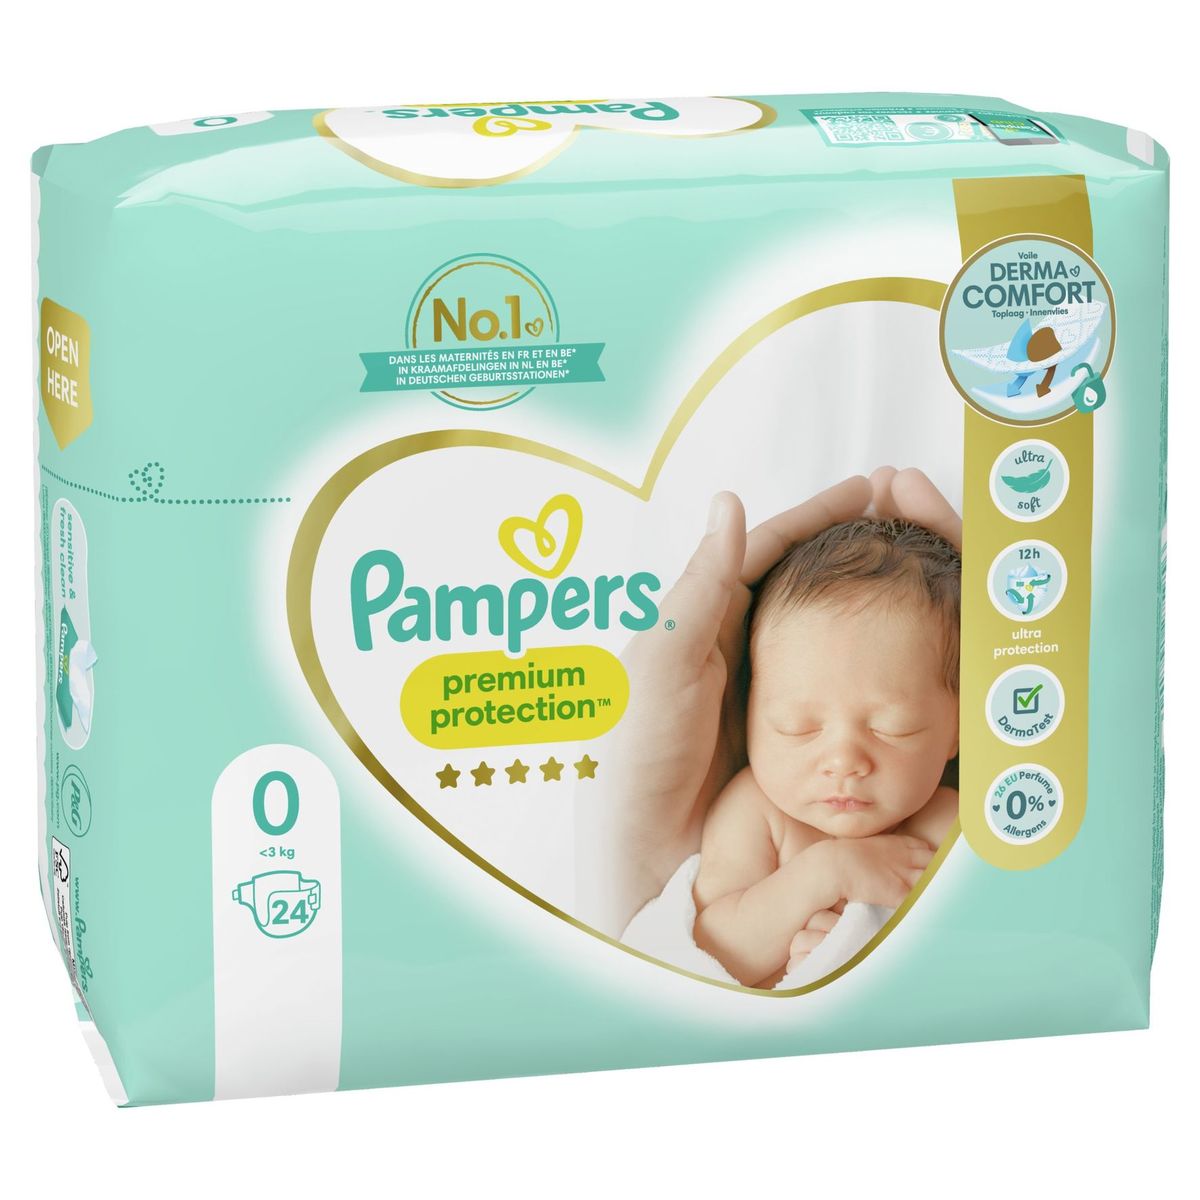 Pampers Premium Protection Taille 0, 24 Langes, <3kg